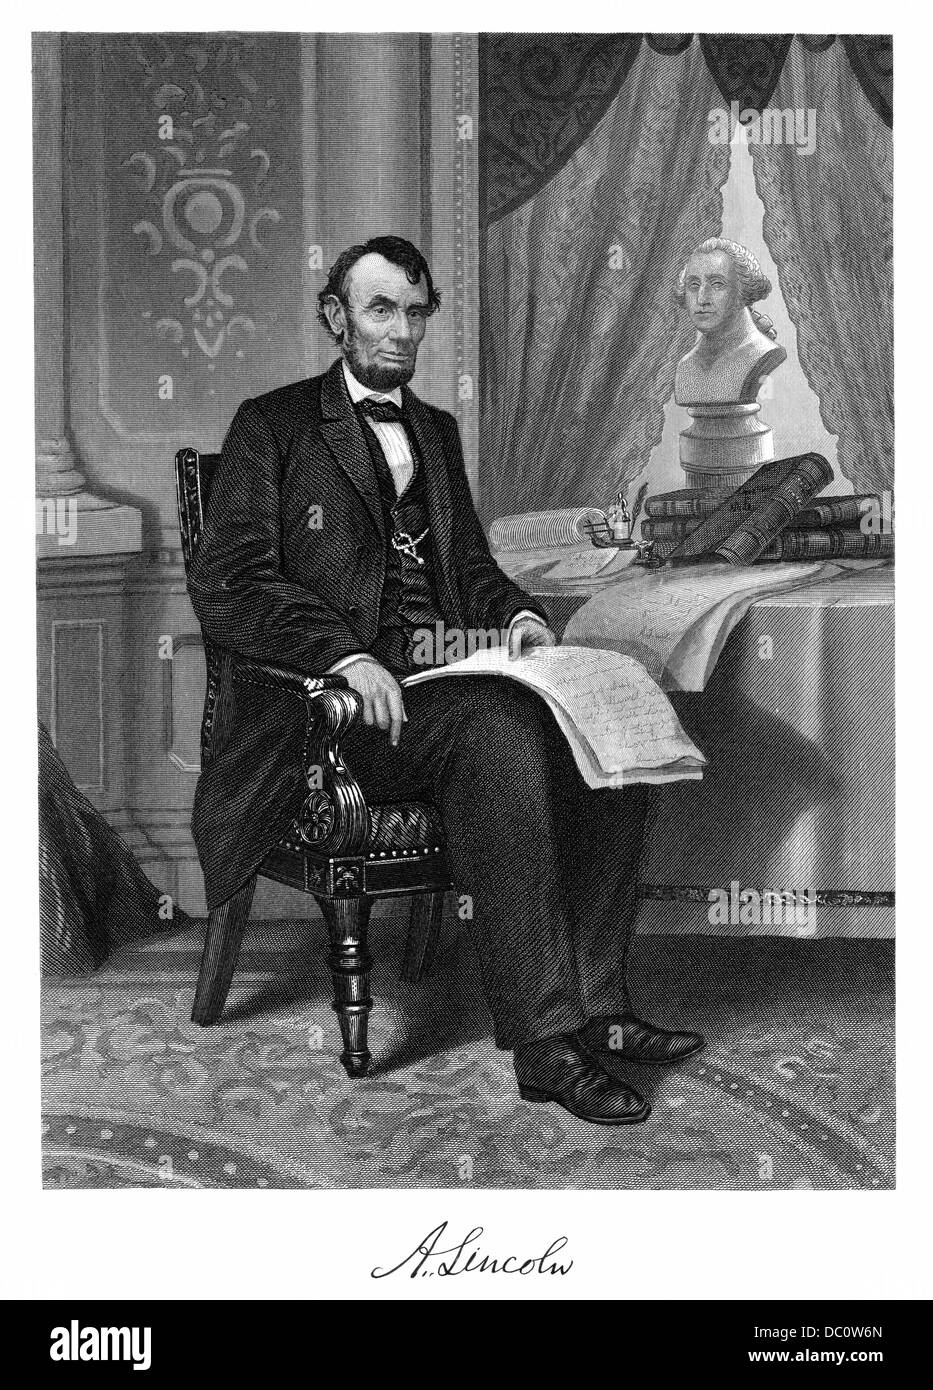 1860s 1800s SEATED PORTRAIT ABRAHAM LINCOLN PRESIDENT WITH SIGNATURE FROM PAINTING BY NAST Stock Photo